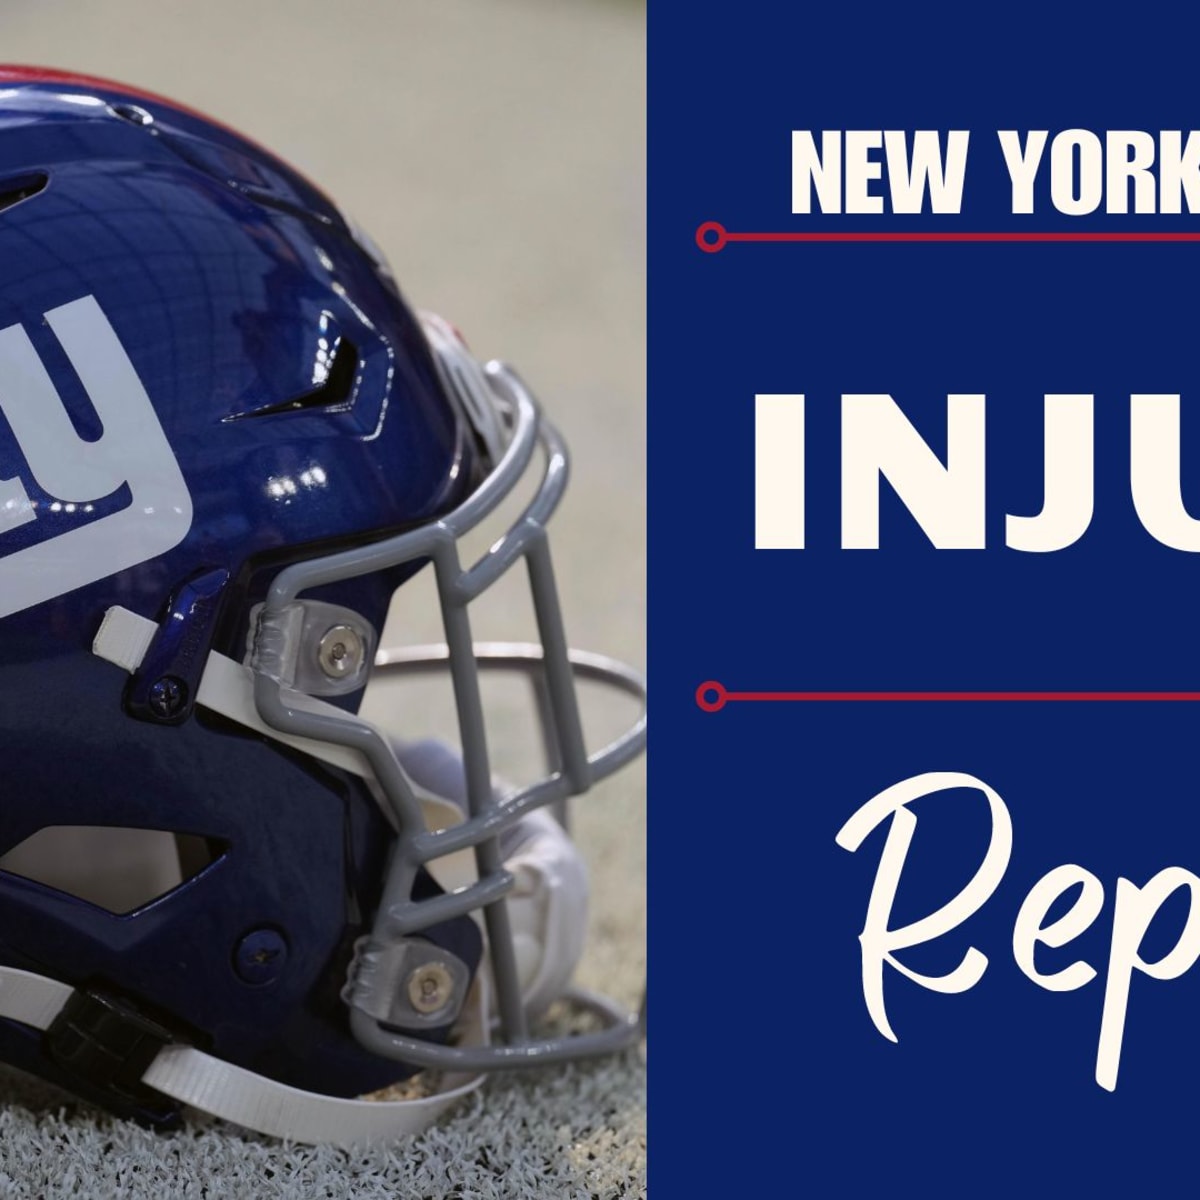 Giants Injury List Today - October 1